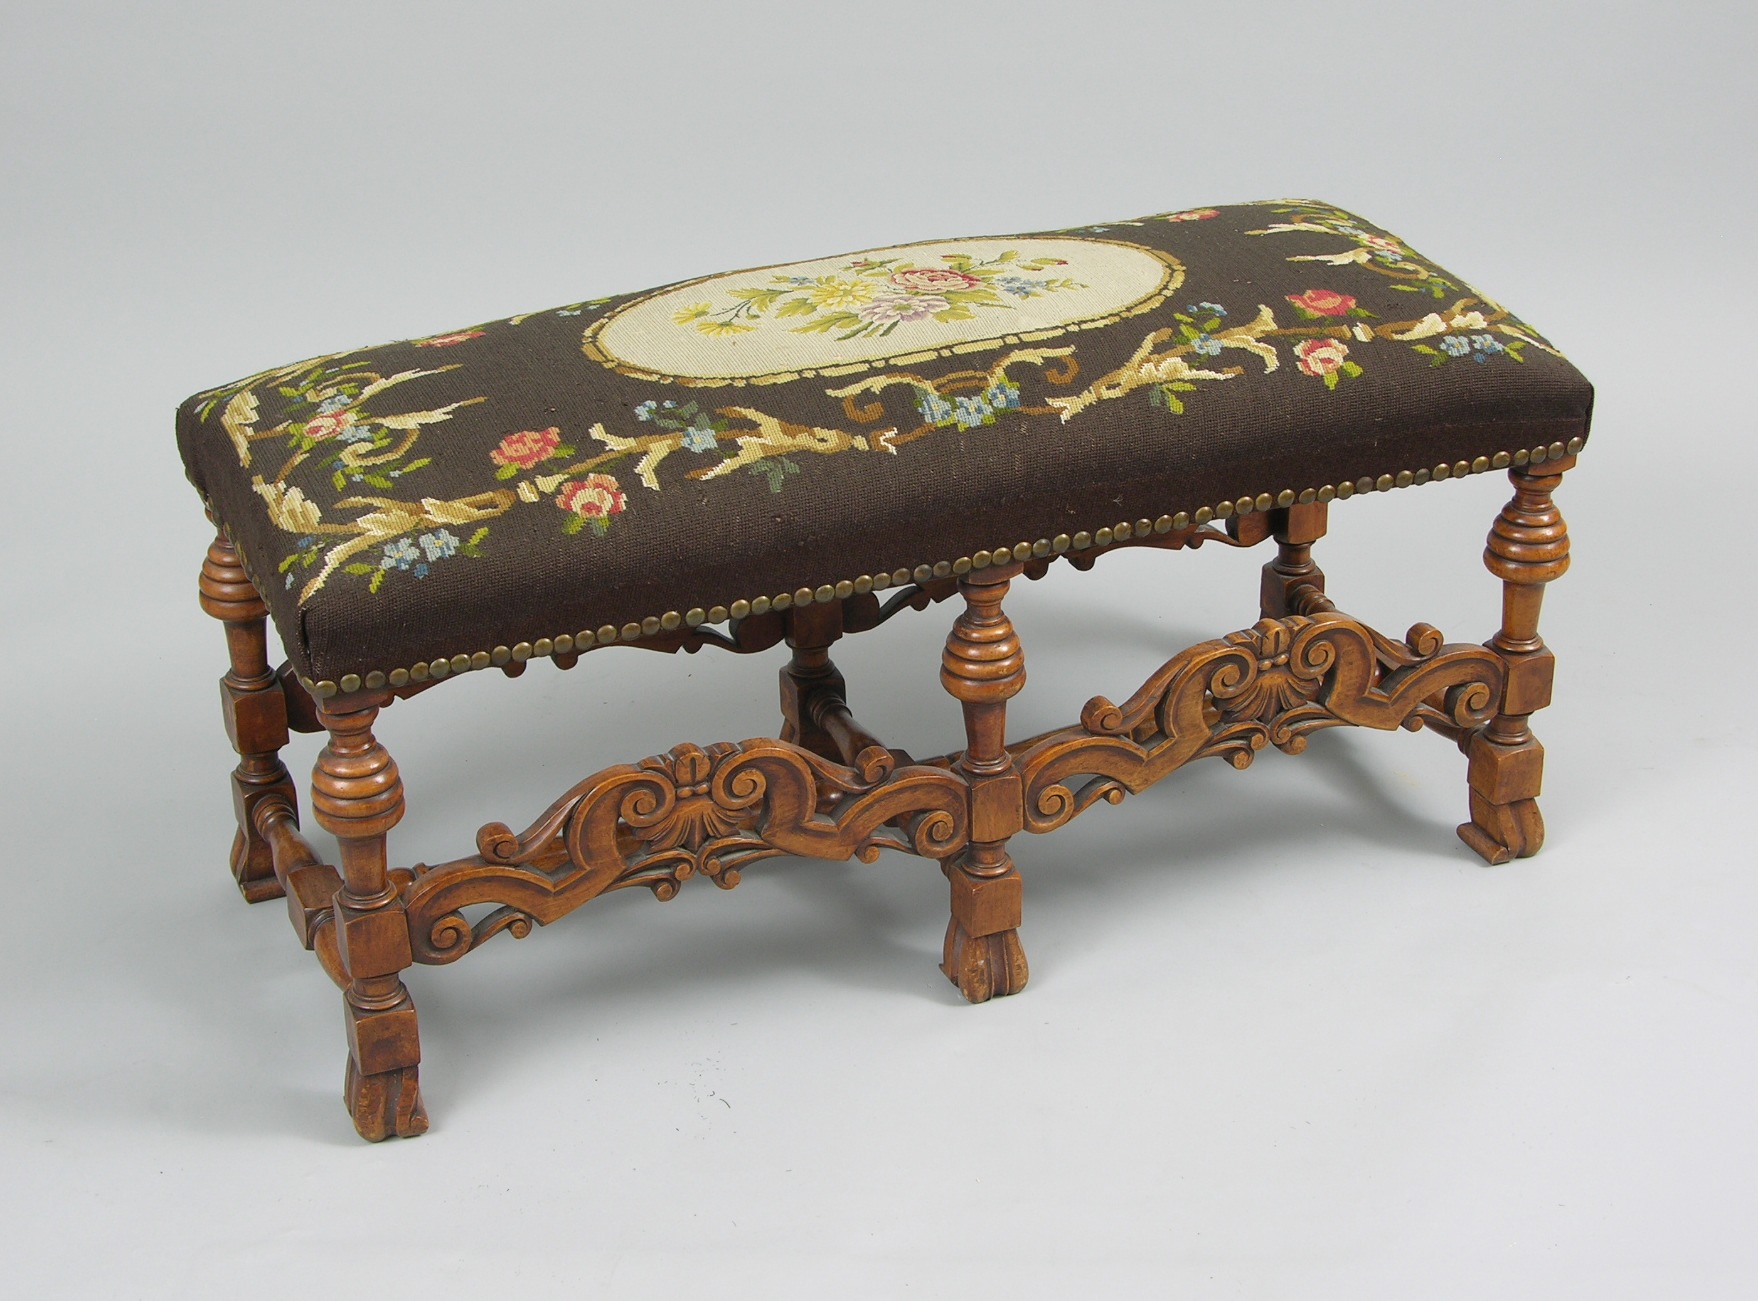 An Antique Needlepoint/Pettipoint Bench, 11.22.08, Sold: $264.5